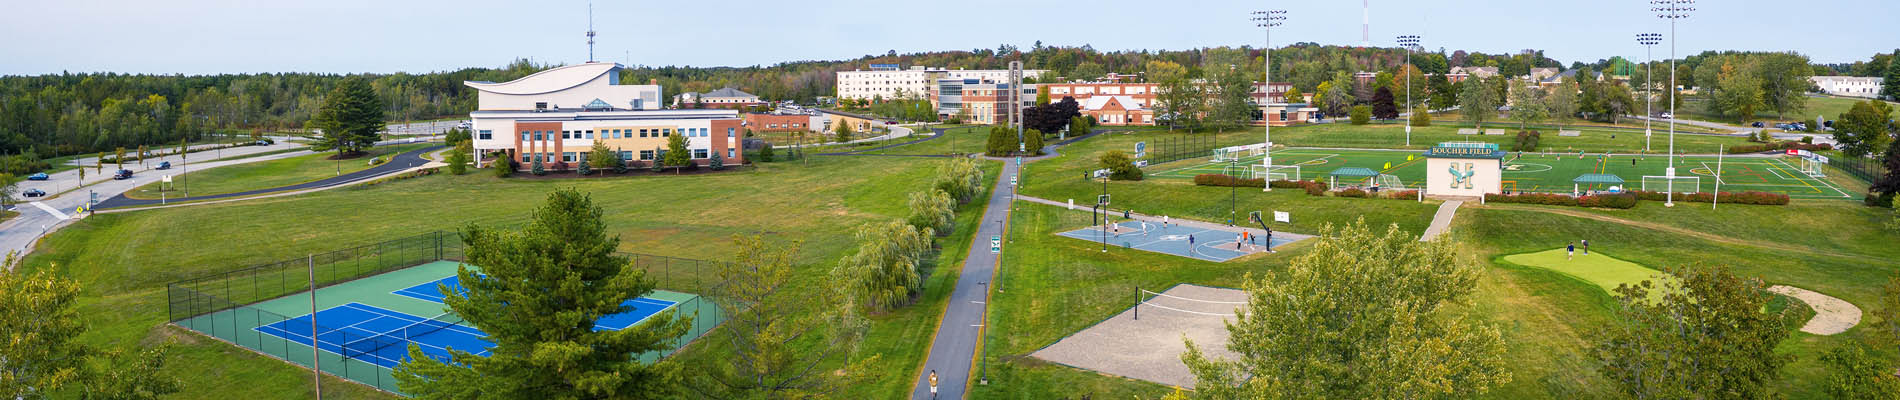 An aerial view of students walking on campus at Husson University